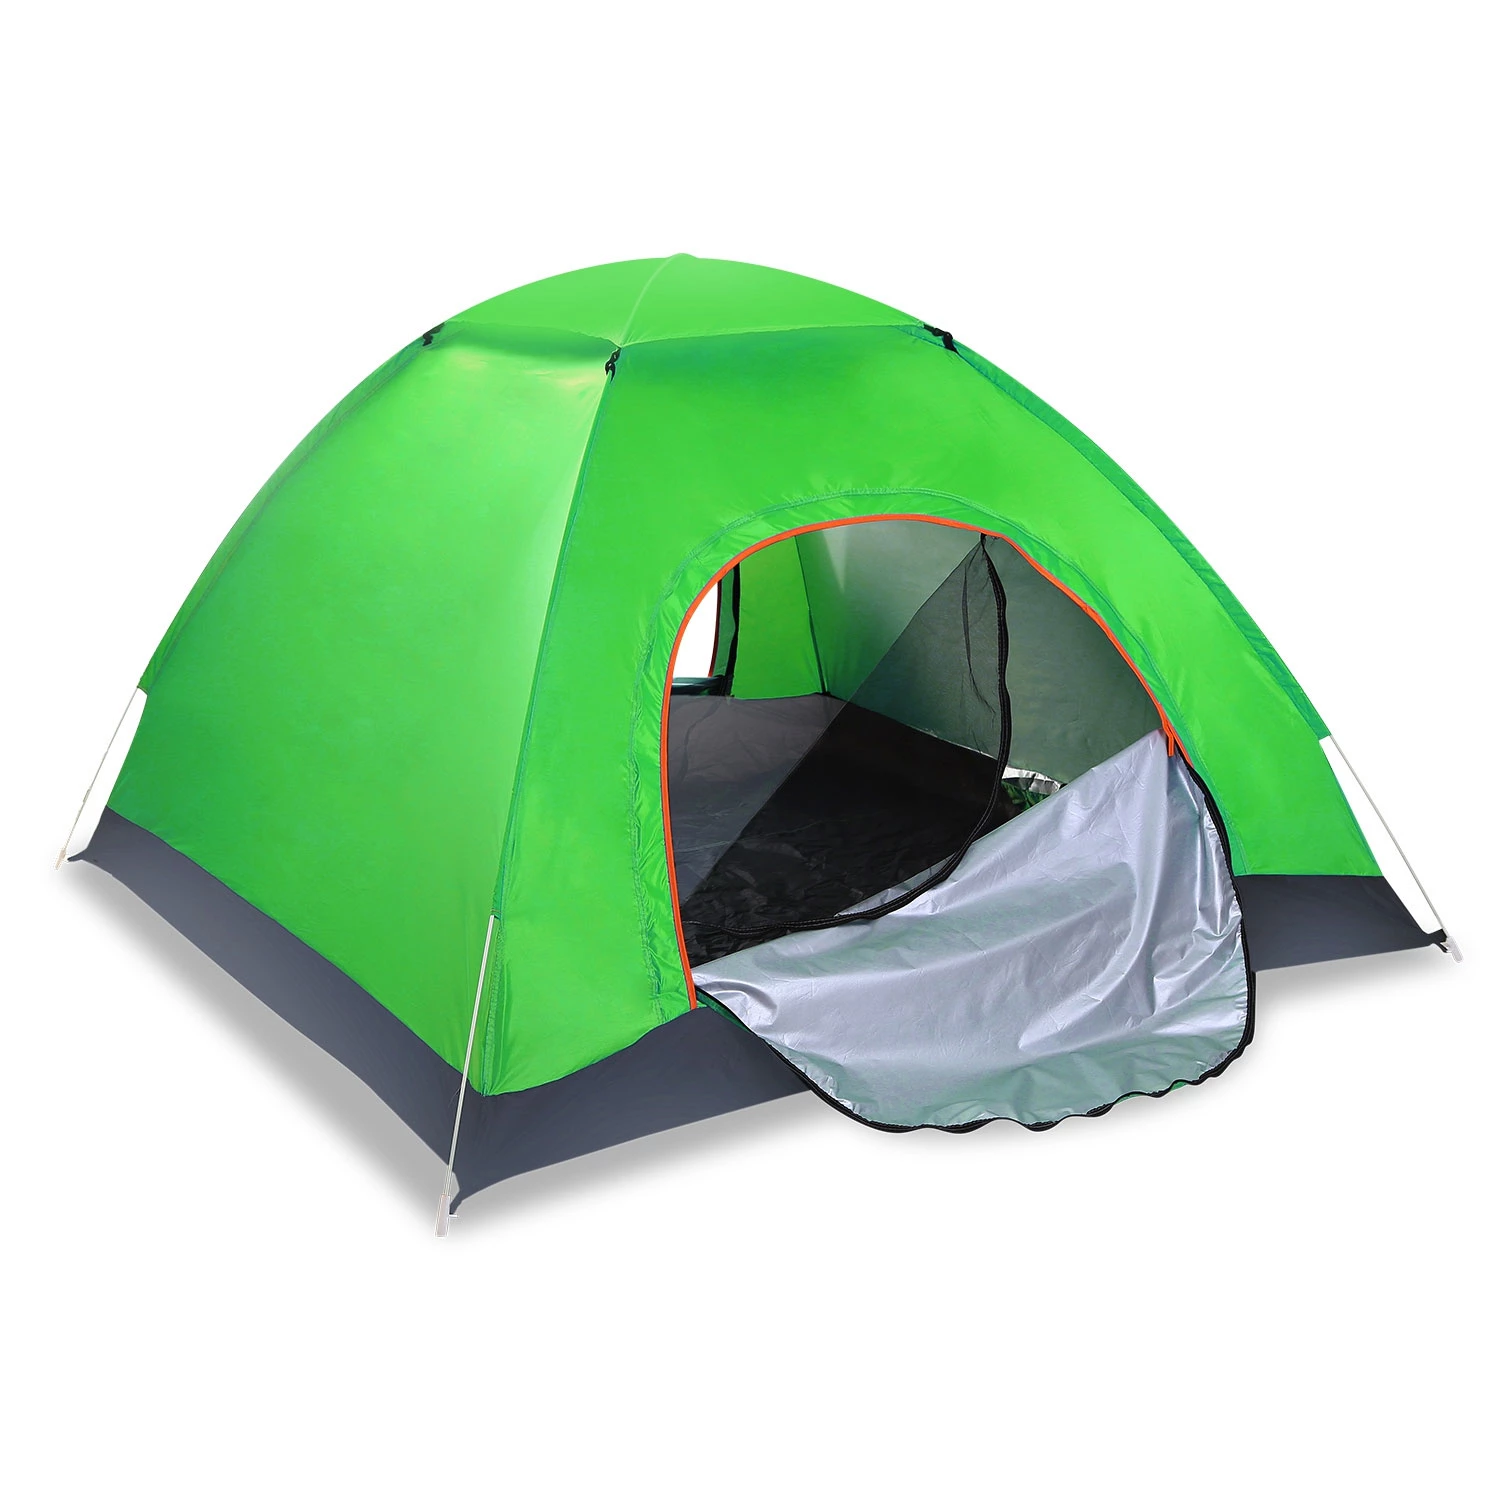 4 Persons Camping Waterproof Tent Pop Up Tent Instant Setup Tent w/2 Mosquito Net Doors Carrying Bag